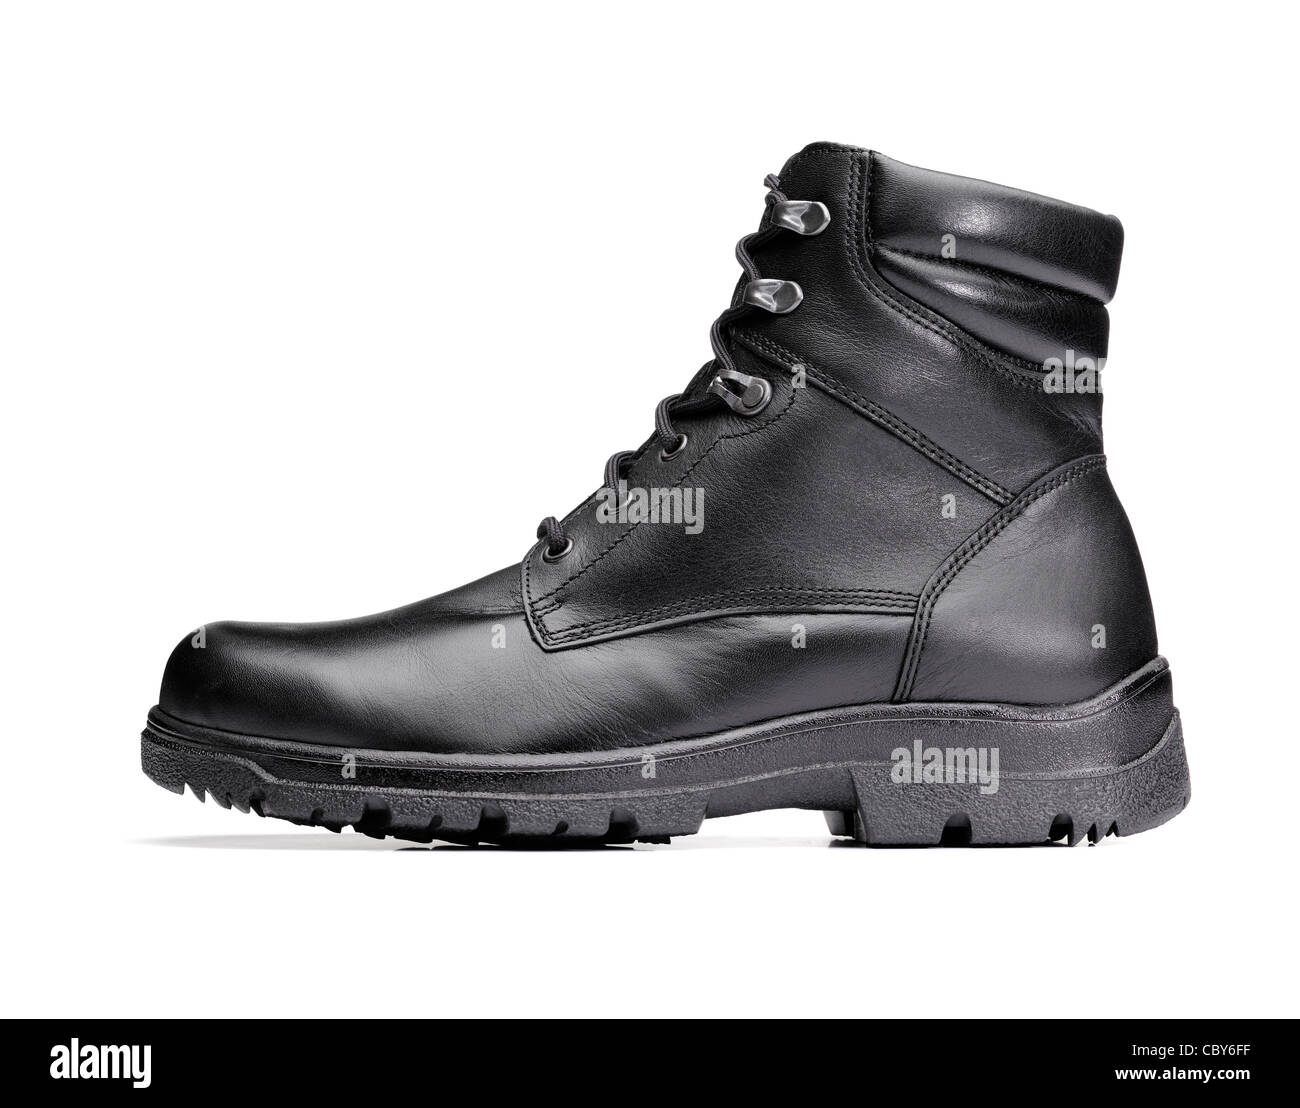 Men's new black leather winter boot isolated on white. Stock Photo